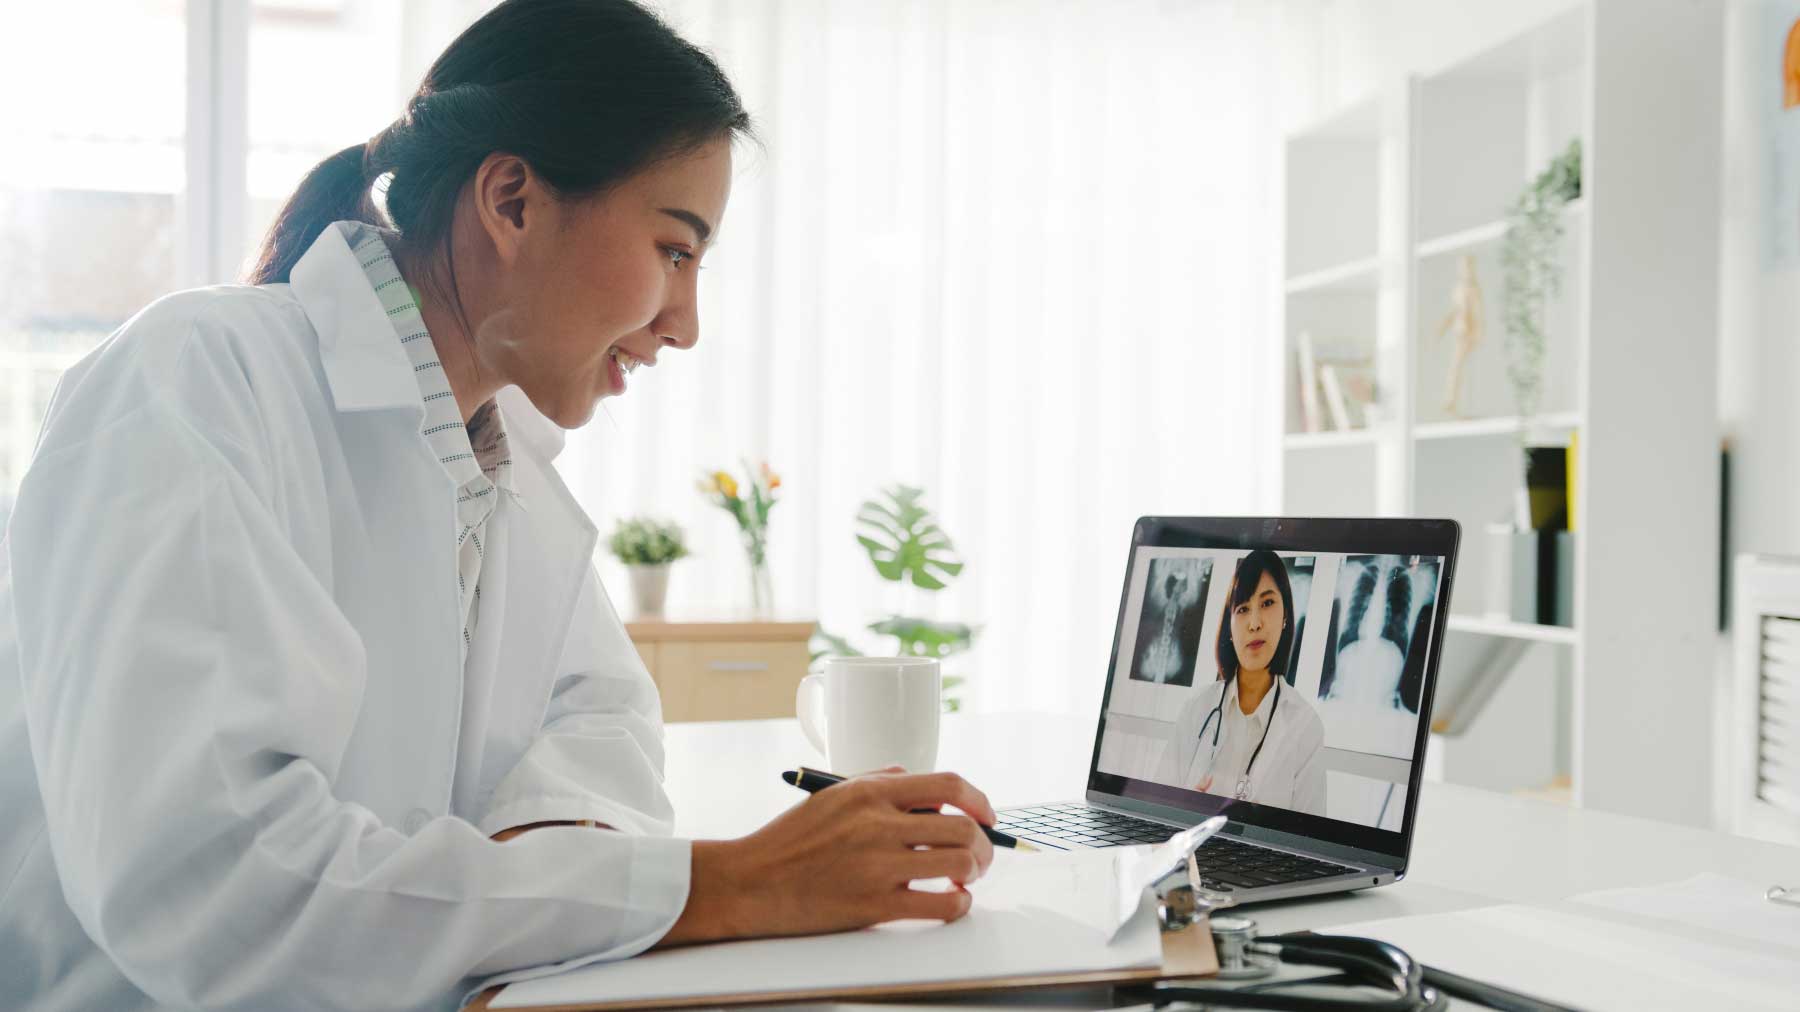 What Does Telehealth Mean?